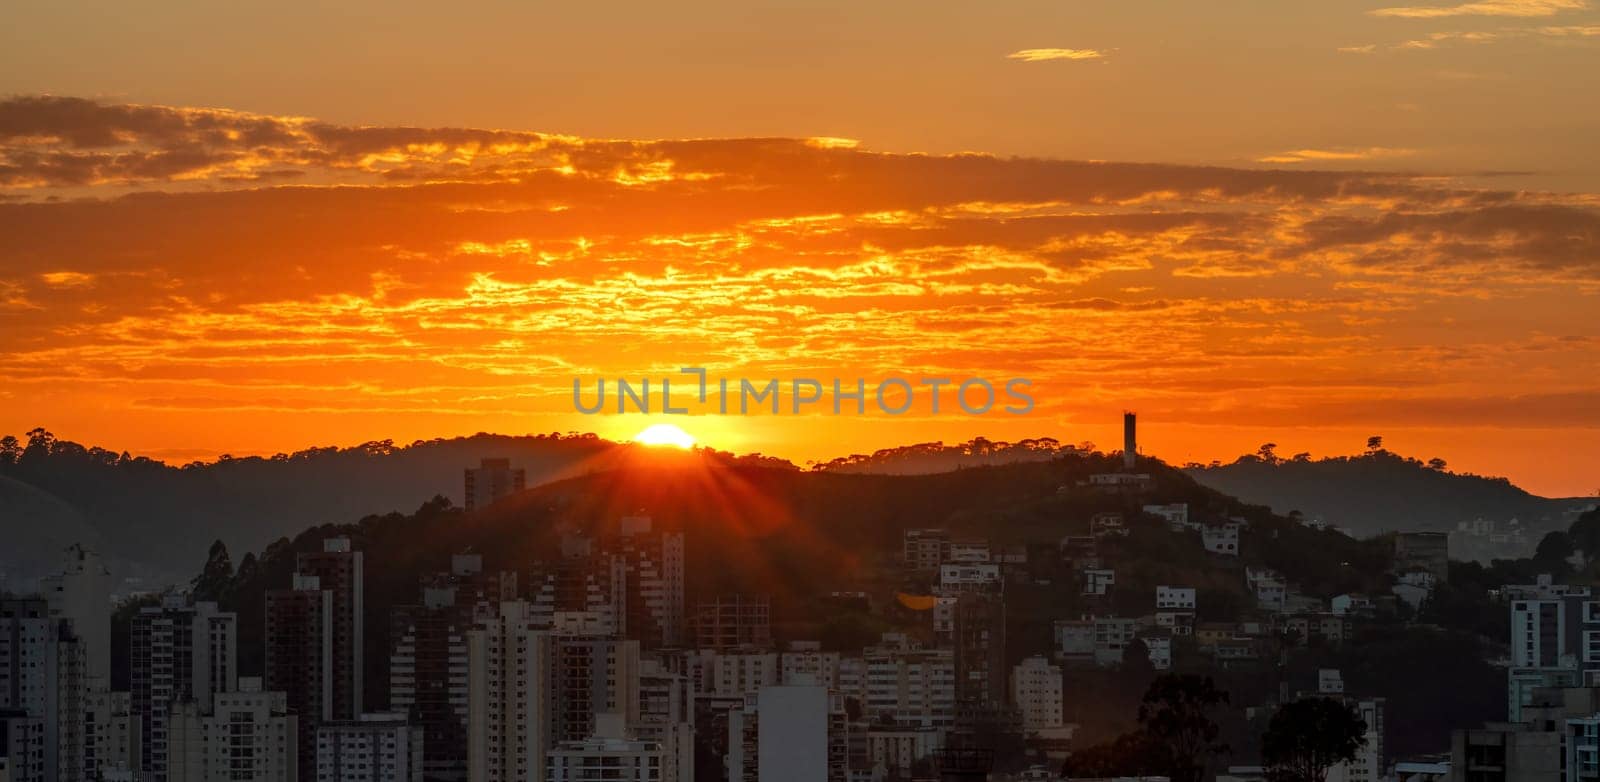 As the sun rises over the mountain at dawn, it creates an orange sky above the city, which waits in darkness for the morning light.